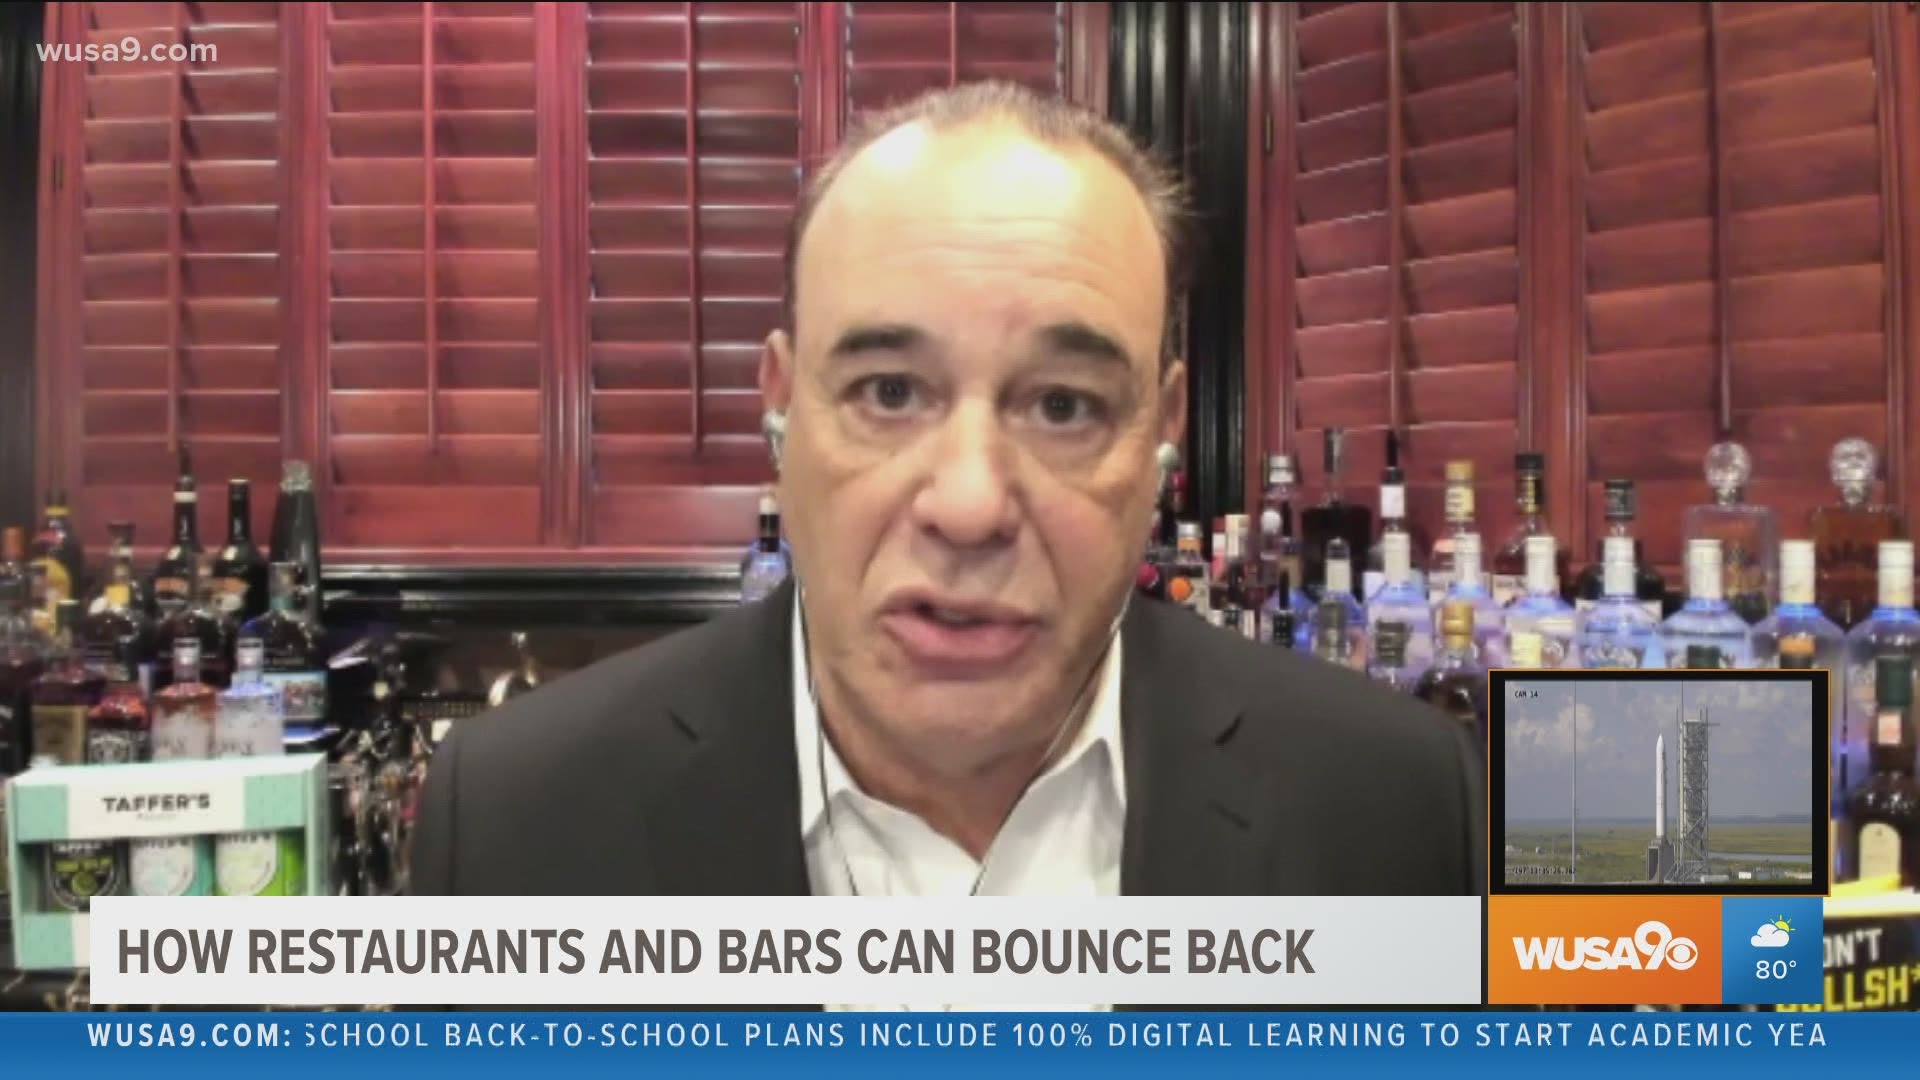 Jon Taffer, host of "Bar Rescue" offers tips on how businesses can bounce back.